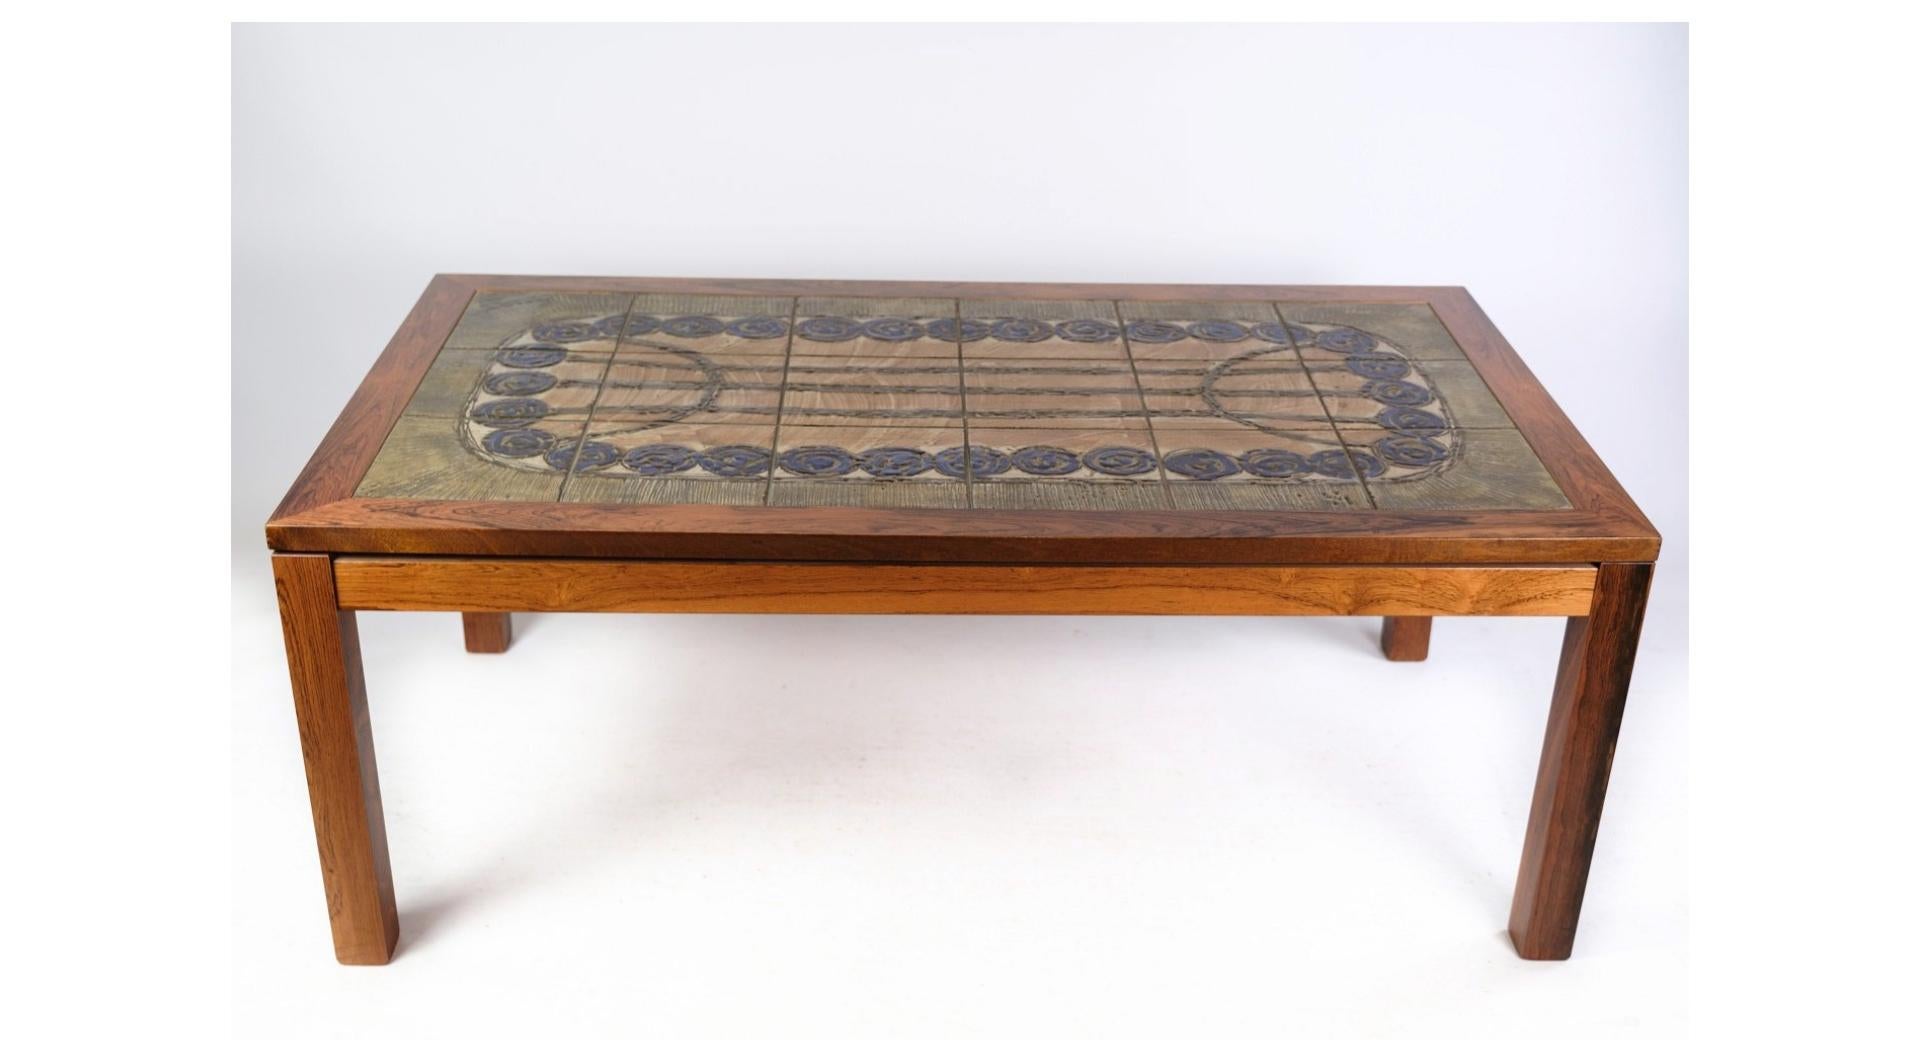 The coffee table adorned with tiles in rosewood Danish design from the 1960s is a stunning example of mid-century modern craftsmanship and style. This piece combines the warmth and richness of rosewood with the artistic beauty of tiled decoration,